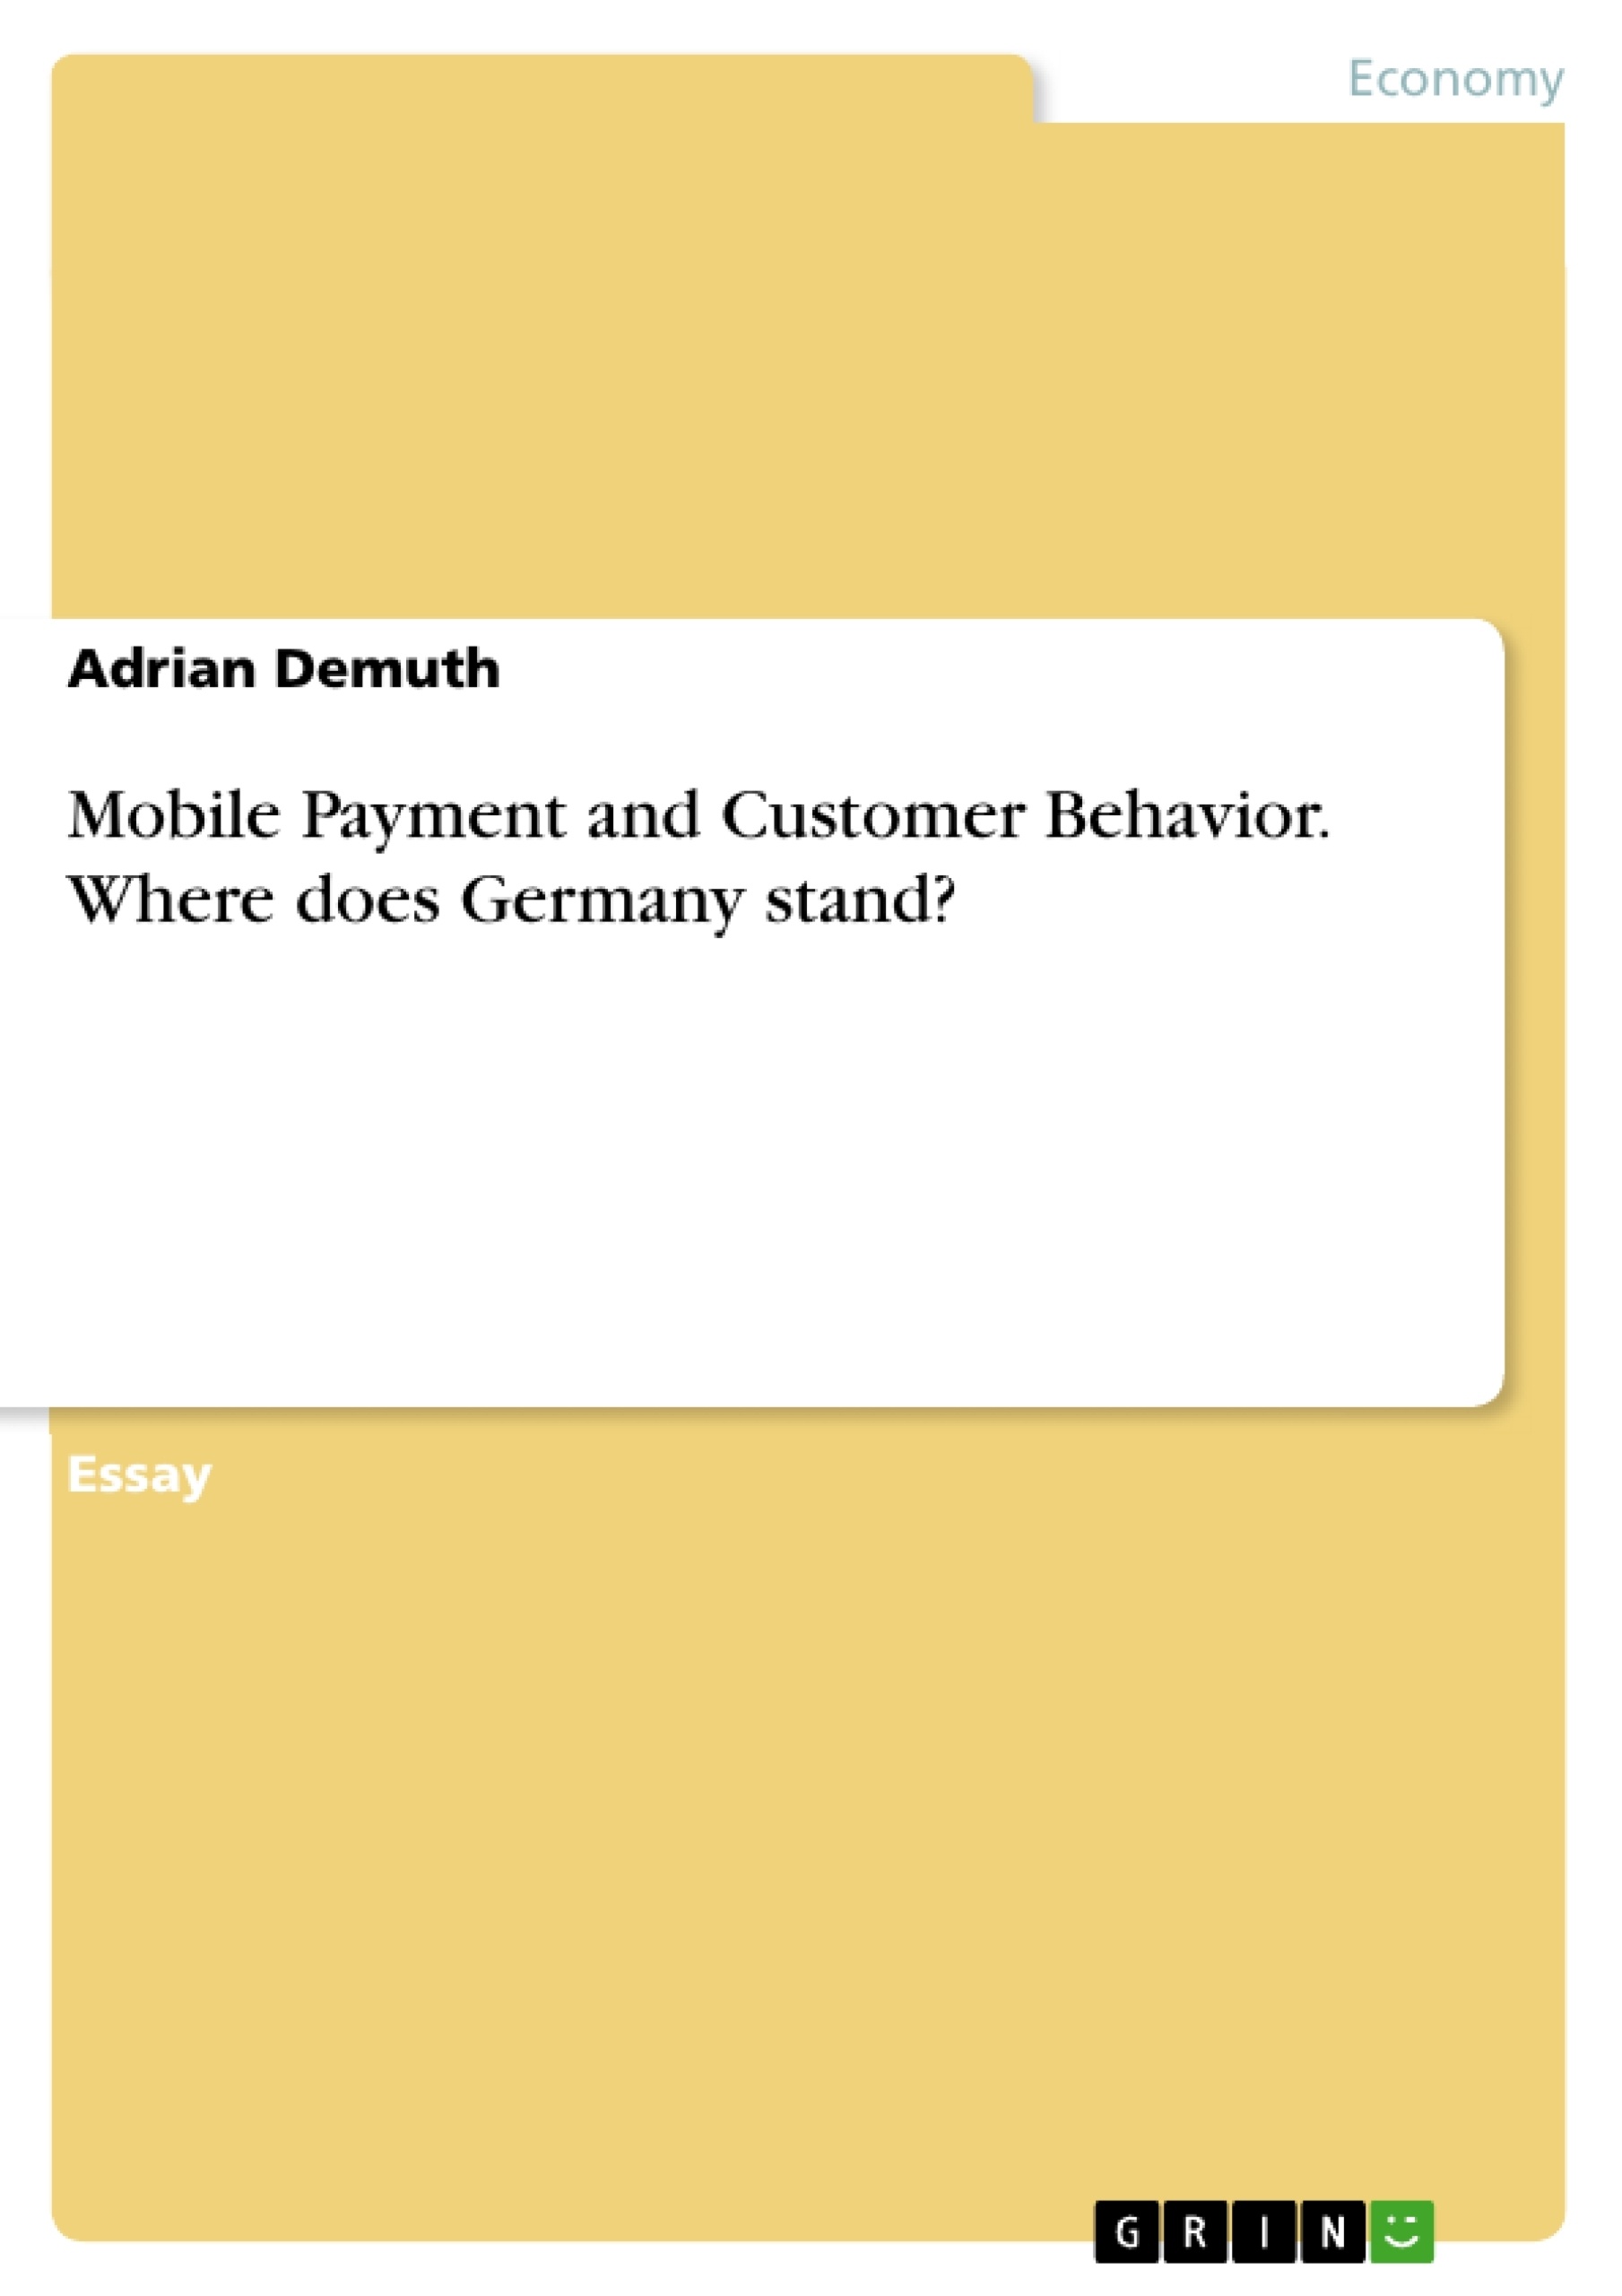 Title: Mobile Payment and Customer Behavior. Where does Germany stand?